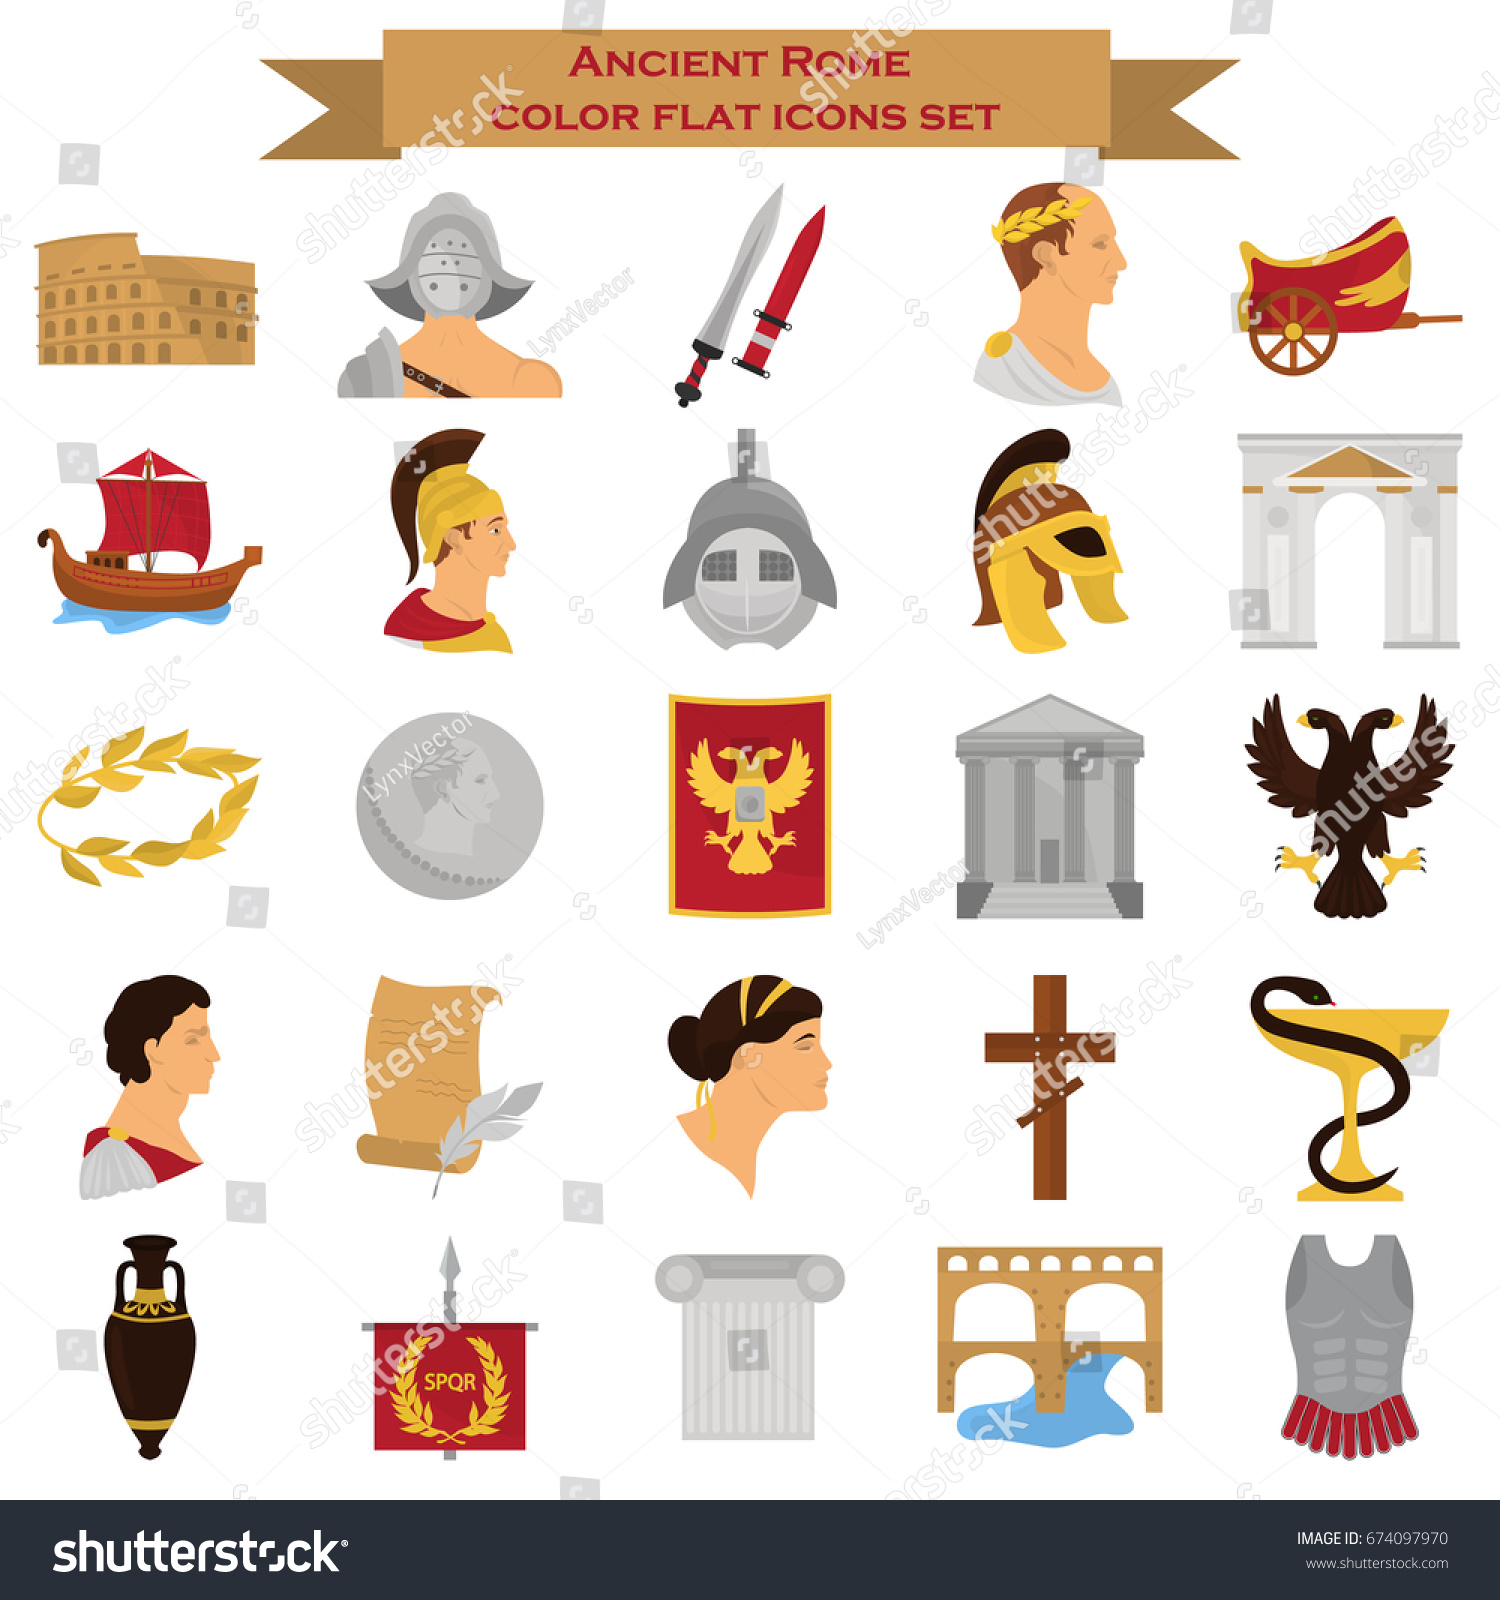 Ancient Rome Color Icons Set Web Stock Vector (Royalty Free) 674097970